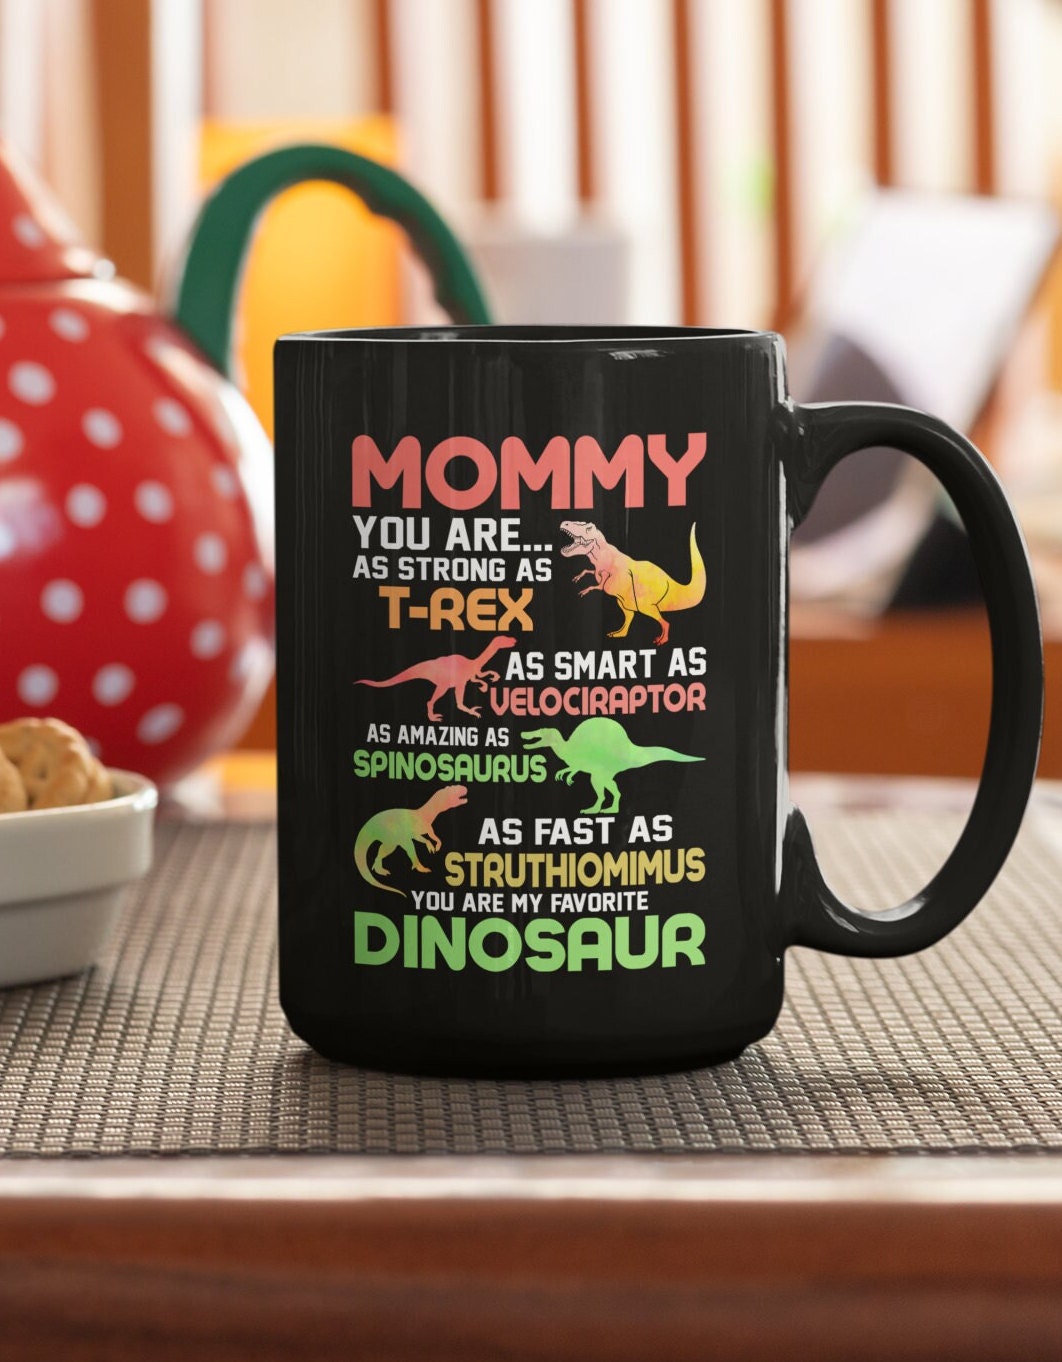 Don't Mess with Mamasaurus You'll Get Jurasskicked Mug, 15 Oz Novelty  Mother's Day Gift Ideal Mom Bi…See more Don't Mess with Mamasaurus You'll  Get